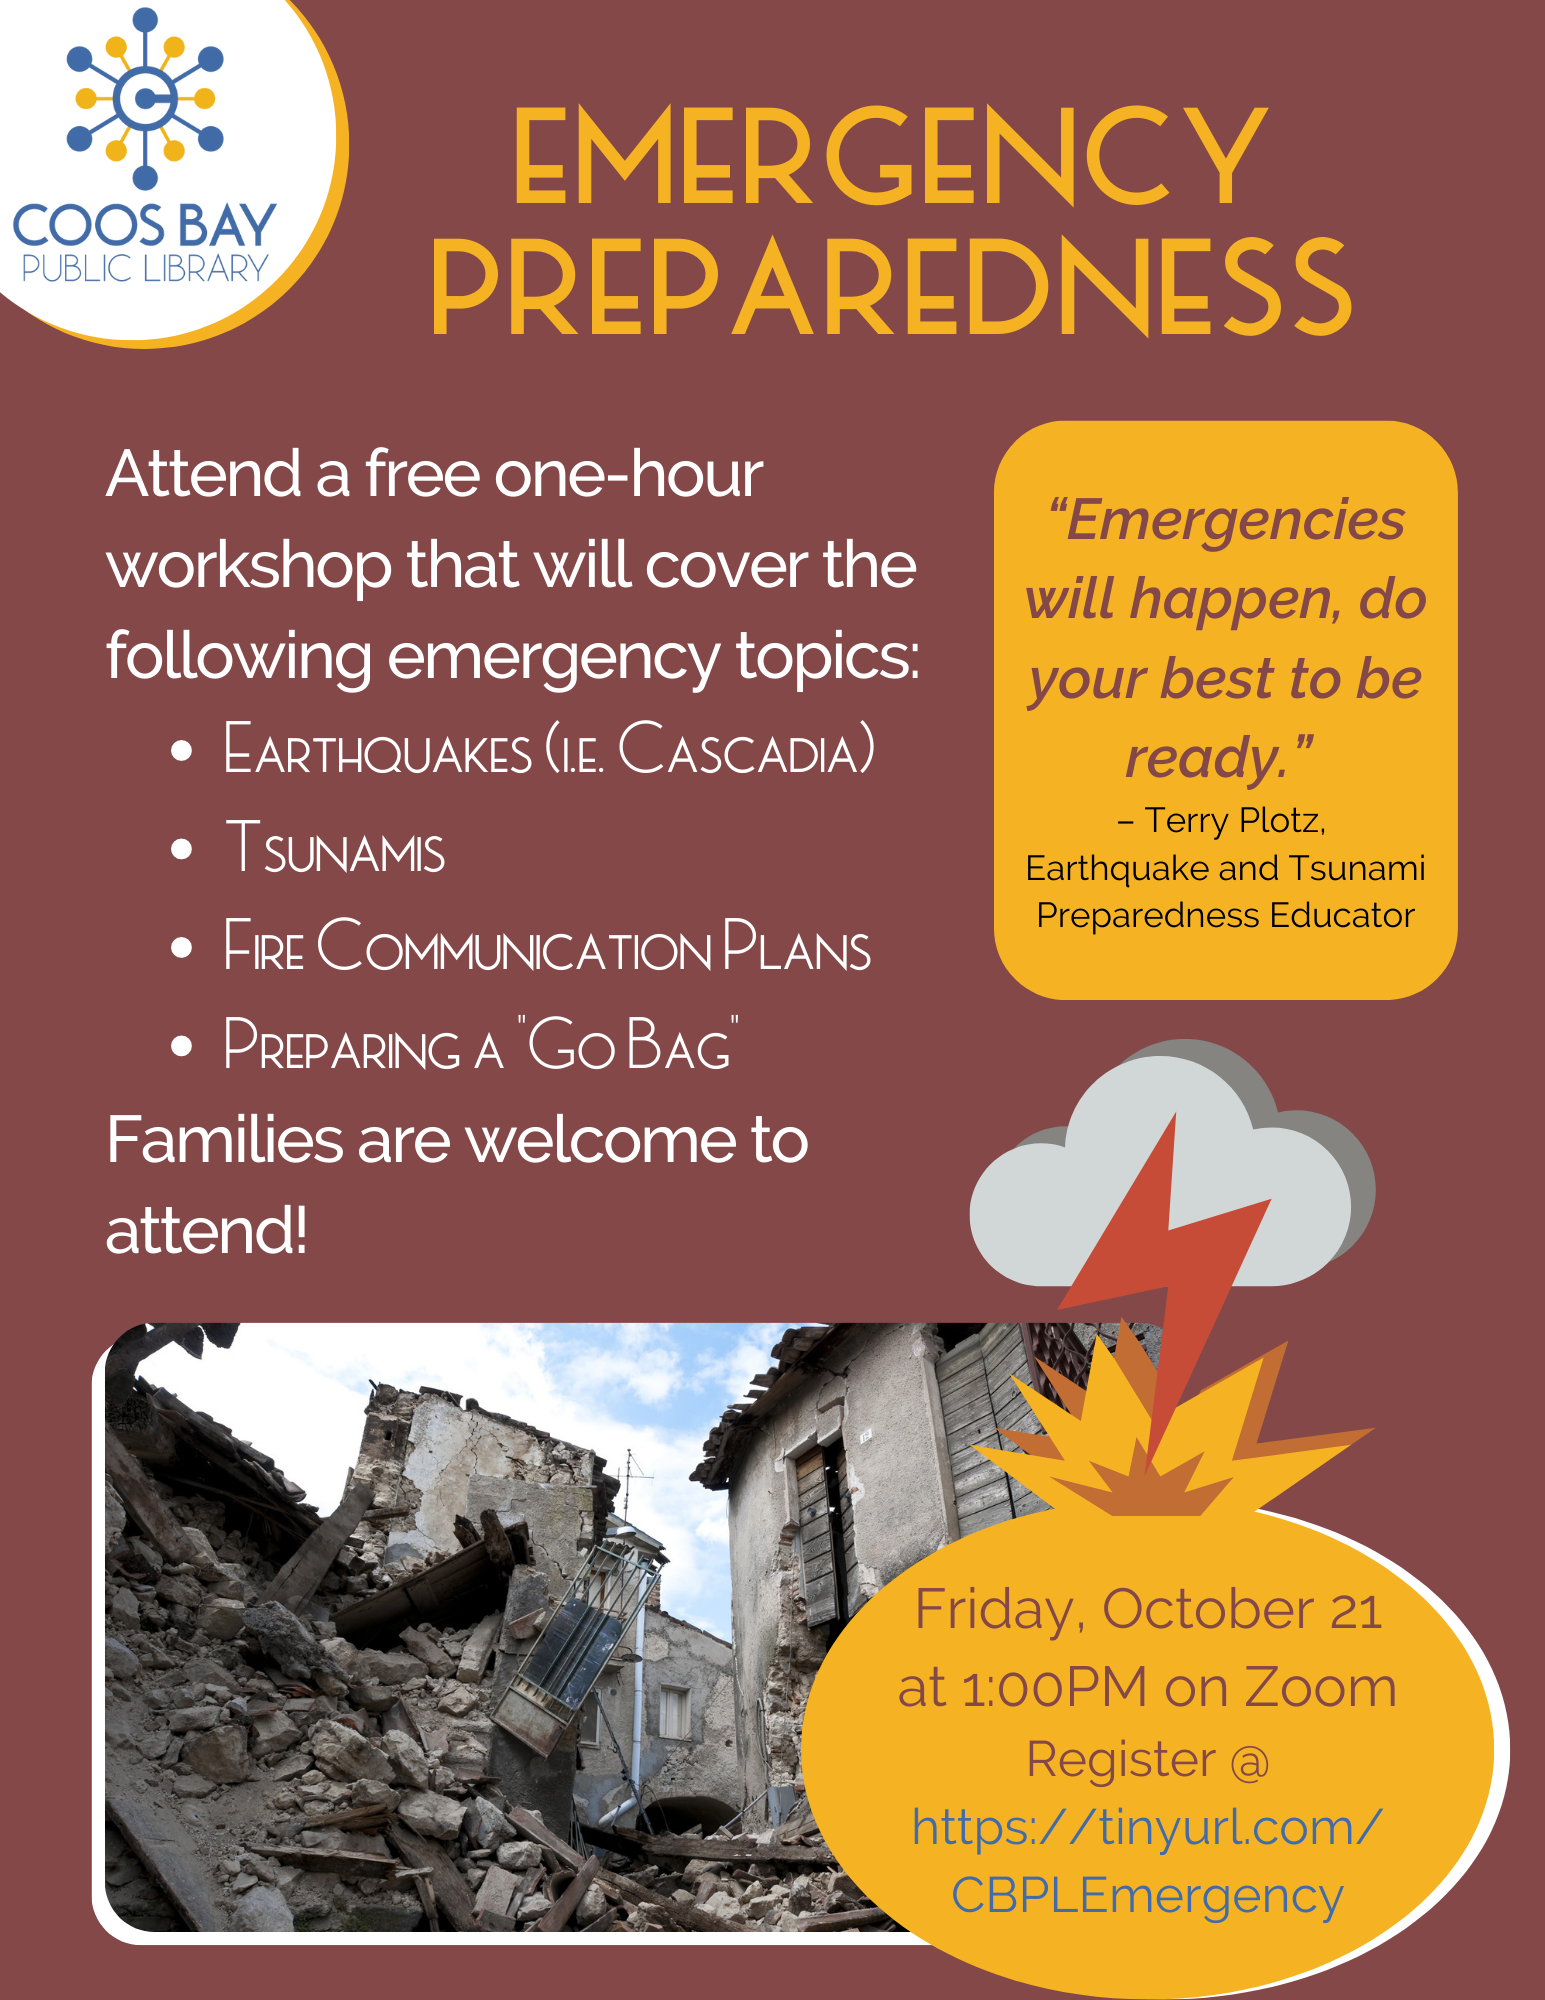 Event Flyer with time/date, registration, and image of building falling down